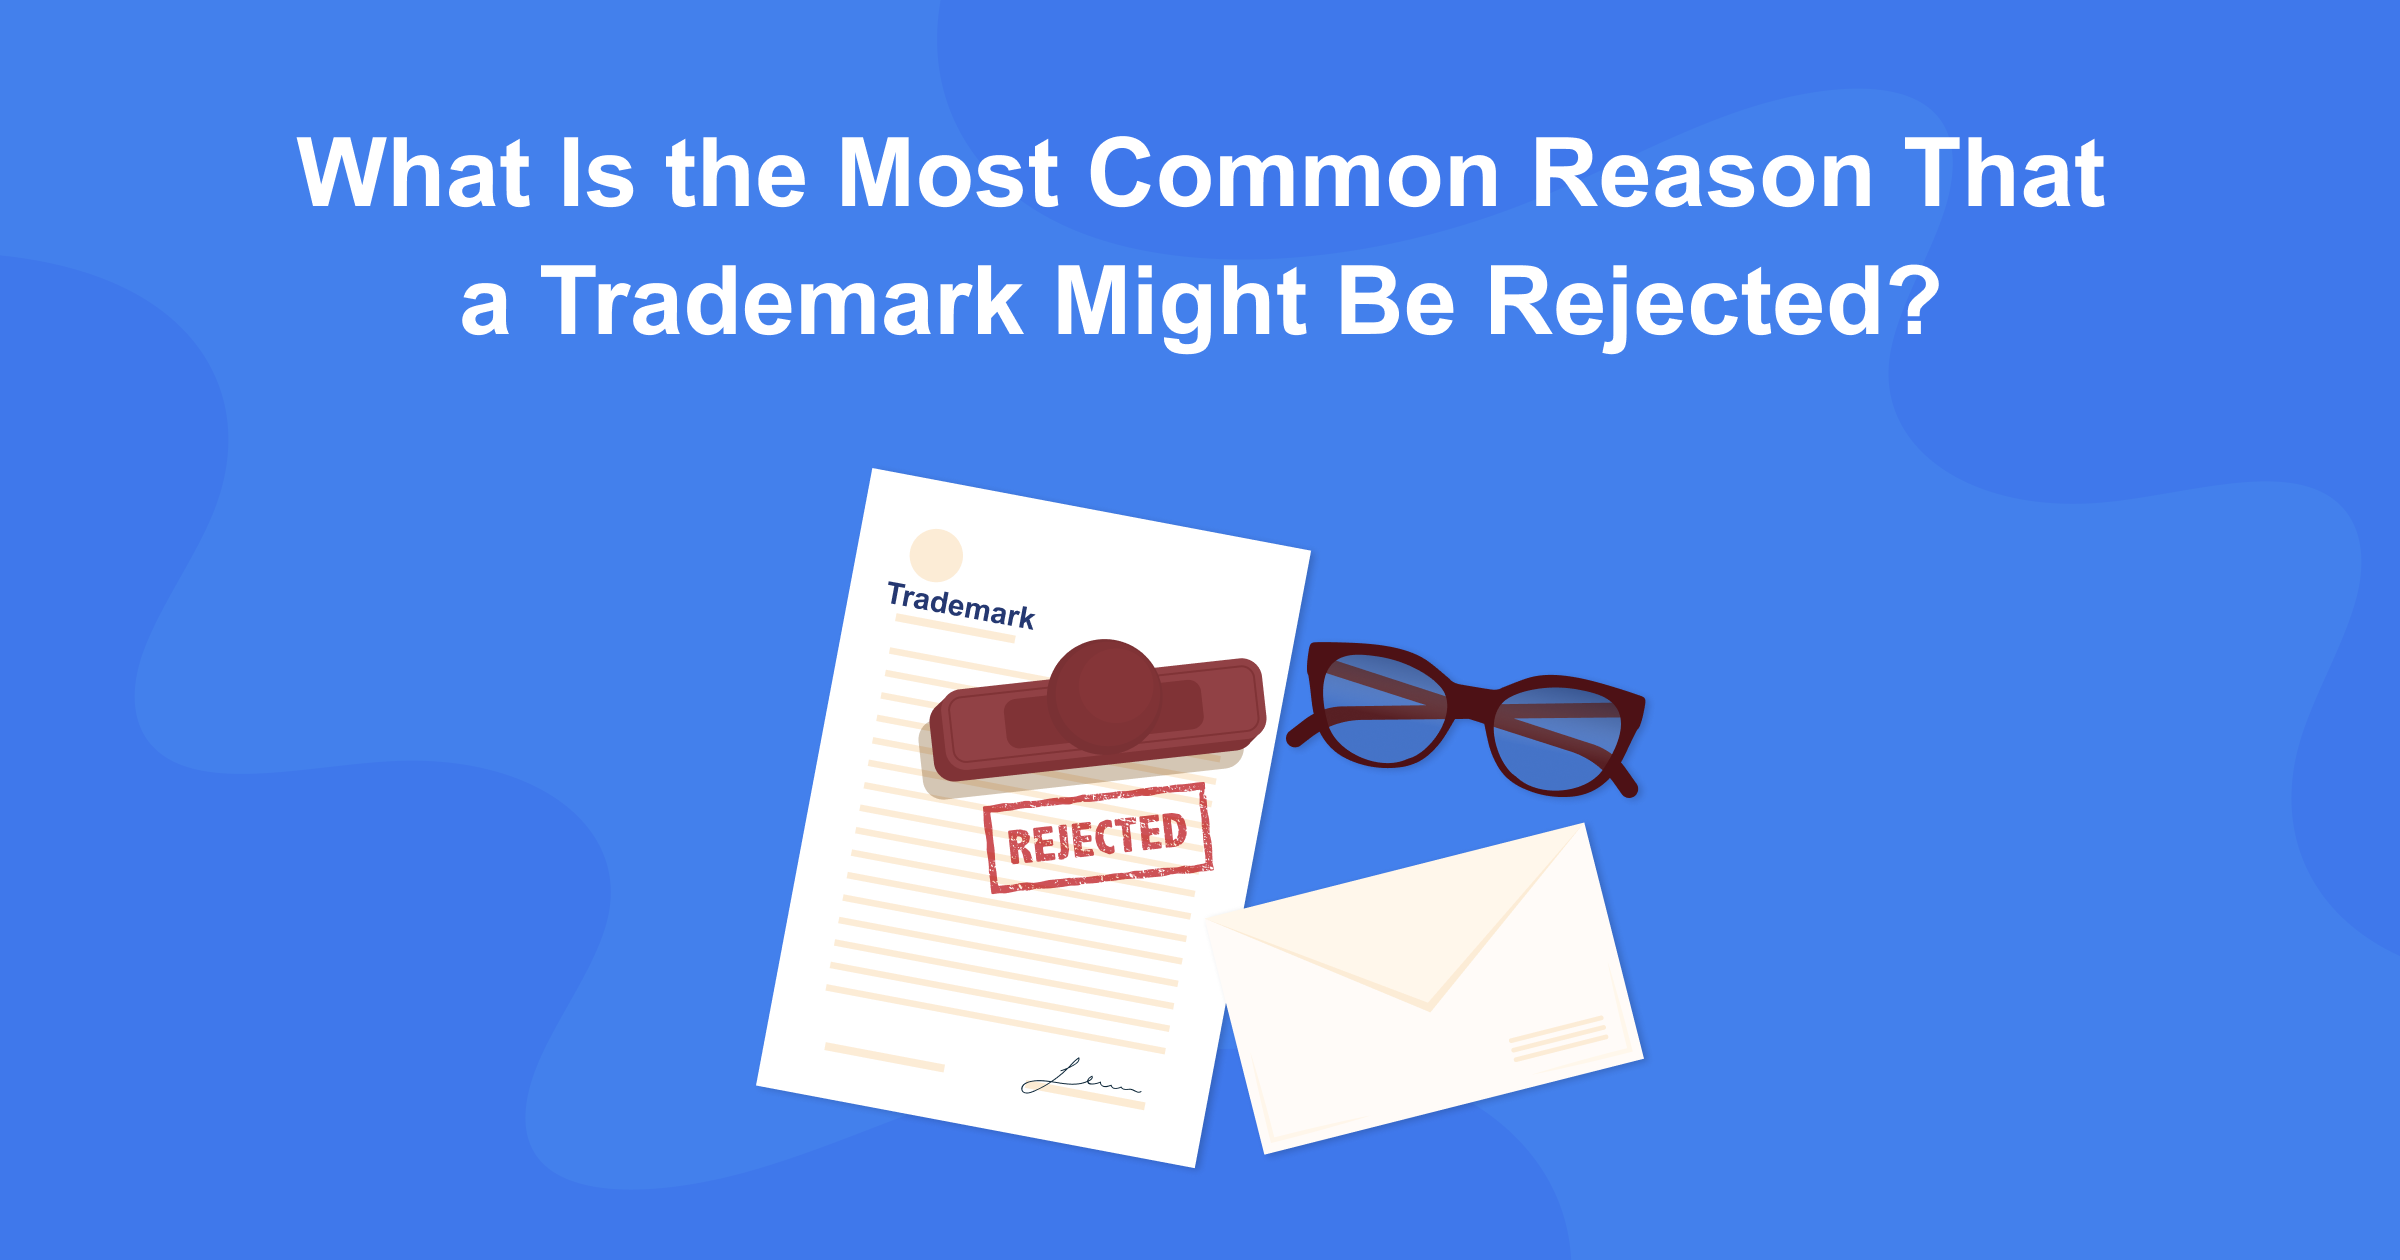 What Is the Most Common Reason That a Trademark Might Be Rejected?